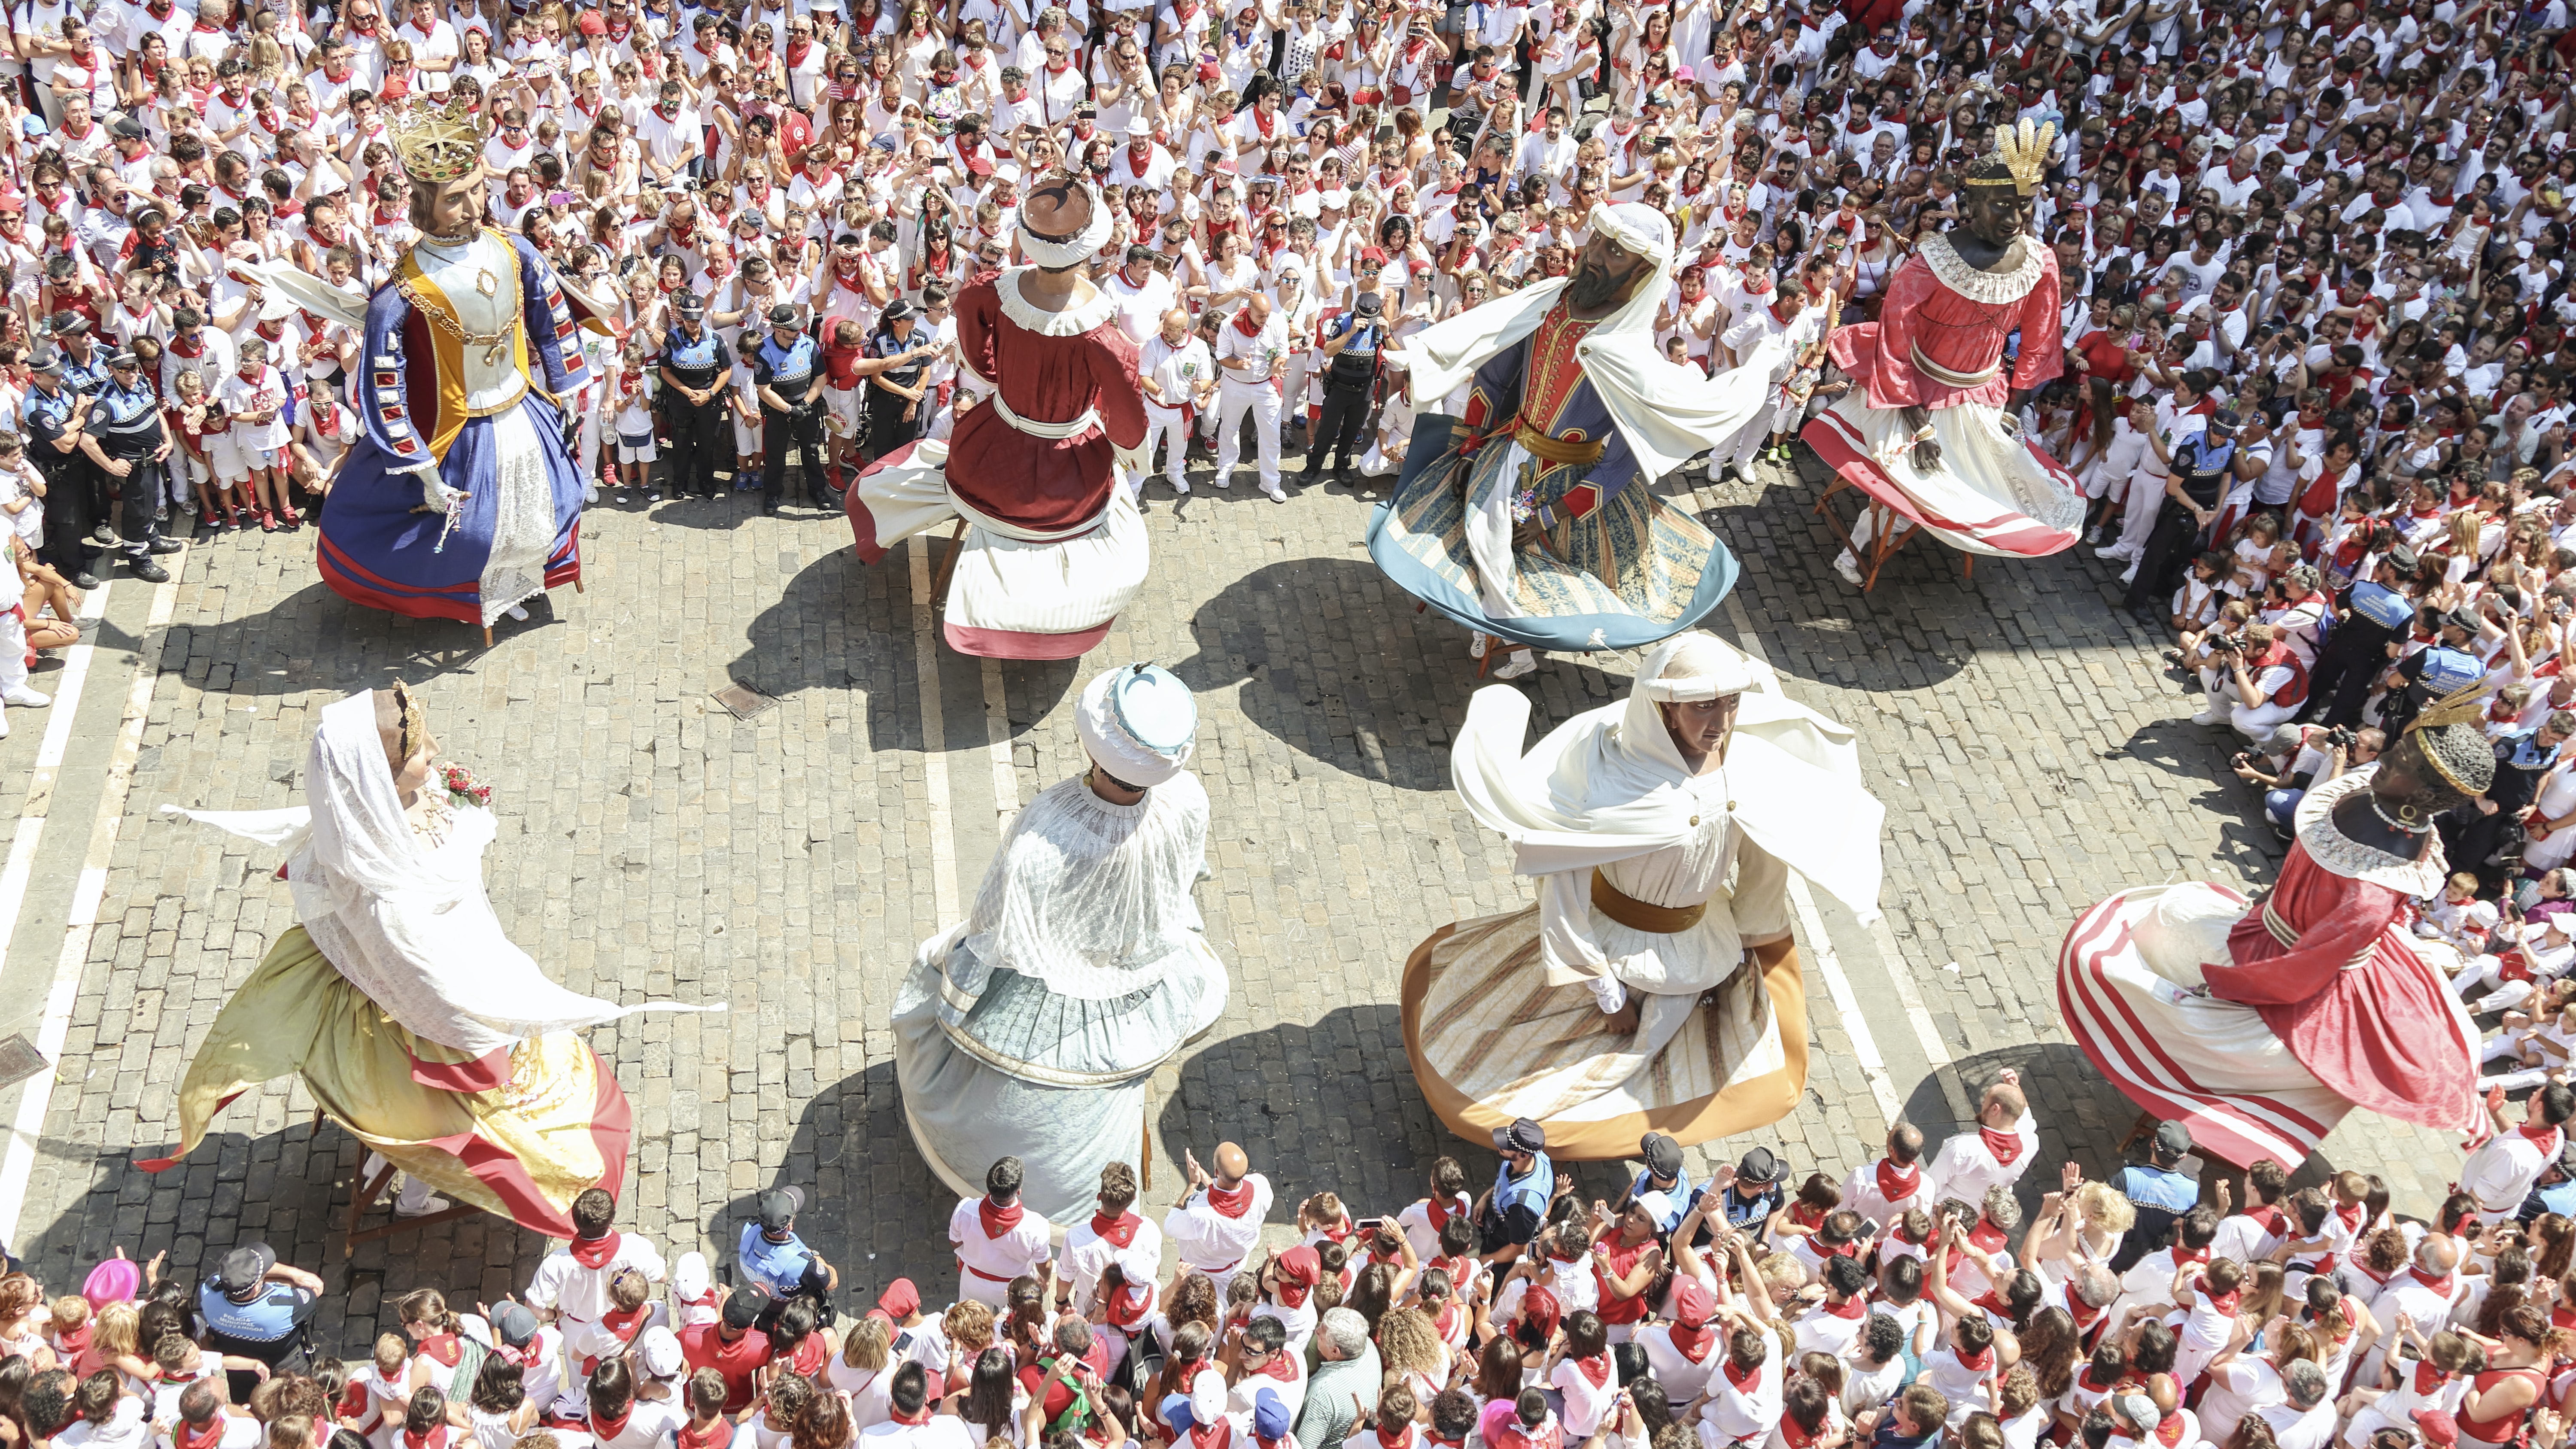 Aerial view of eight puppets with colorful dresses with white and brown hats in a town square, worn by people dancing